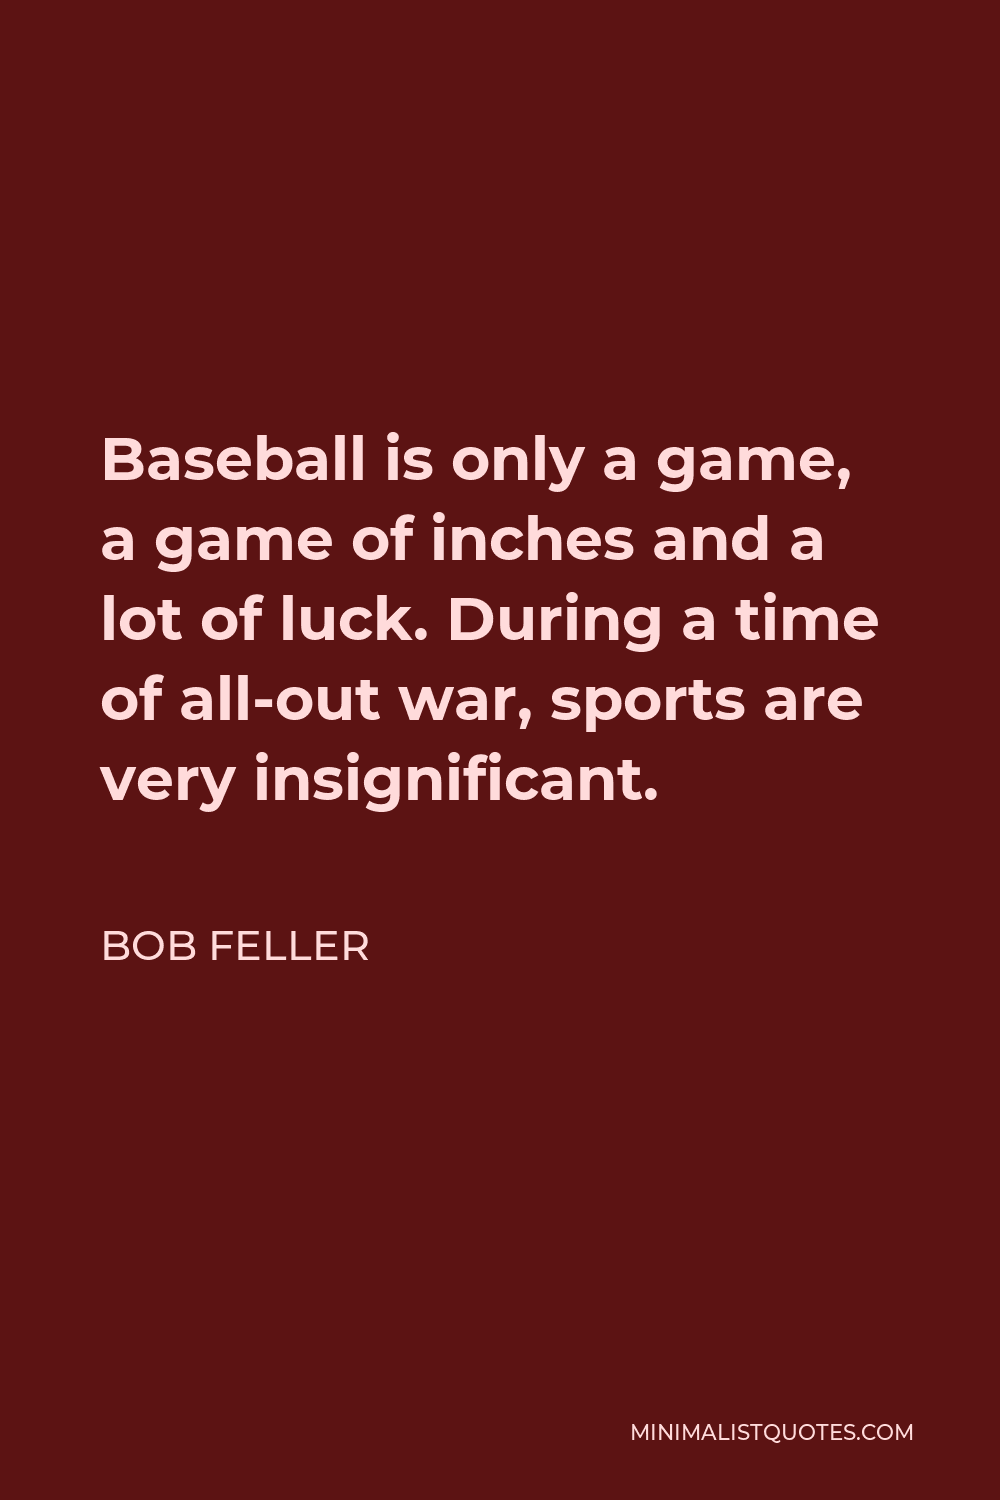 Bob Feller Quote - Baseball is only a game, a game of inches and a lot of luck. During a time of all-out war, sports are very insignificant.